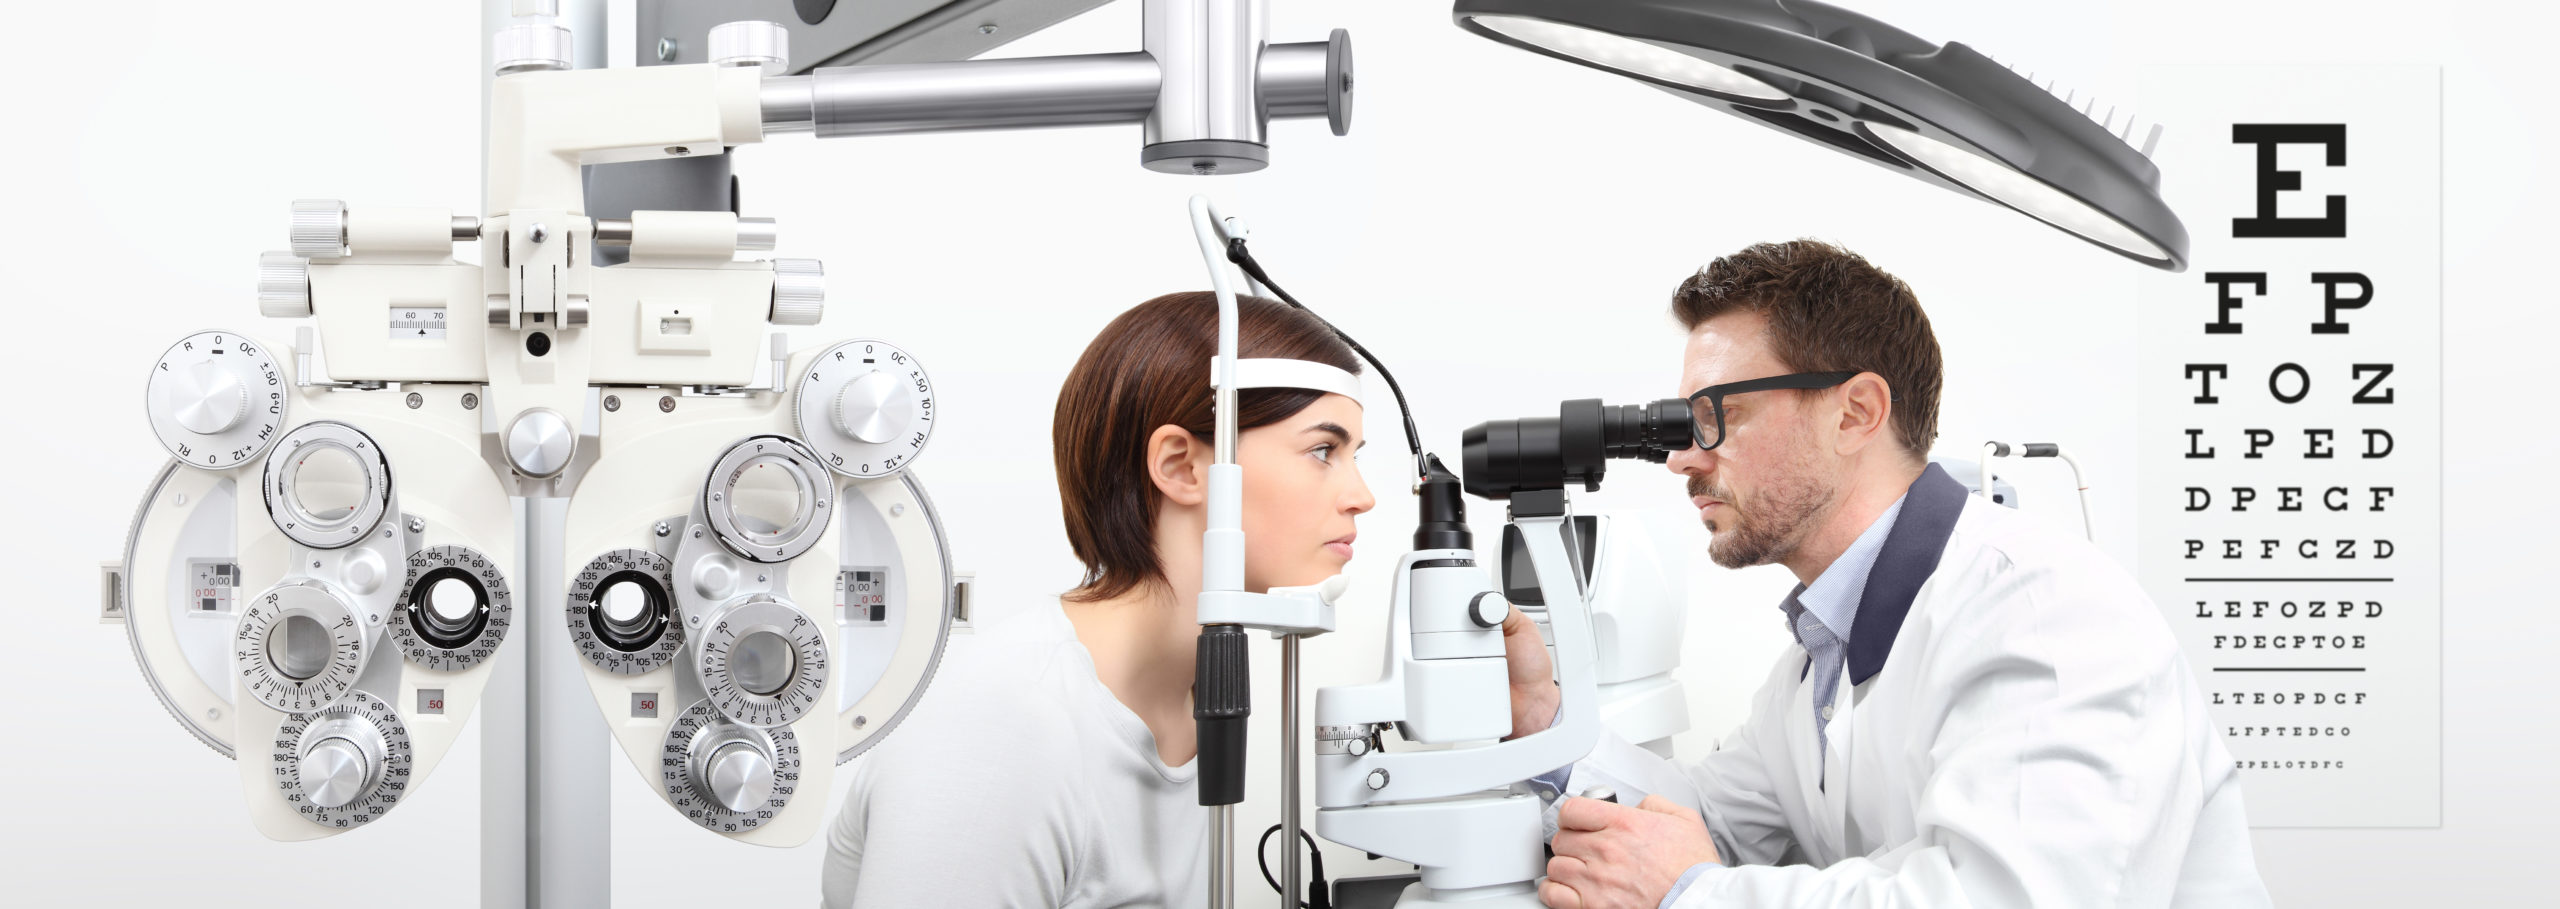 Featured image for “How to Choose an Ophthalmologist and Eye Care Professional”